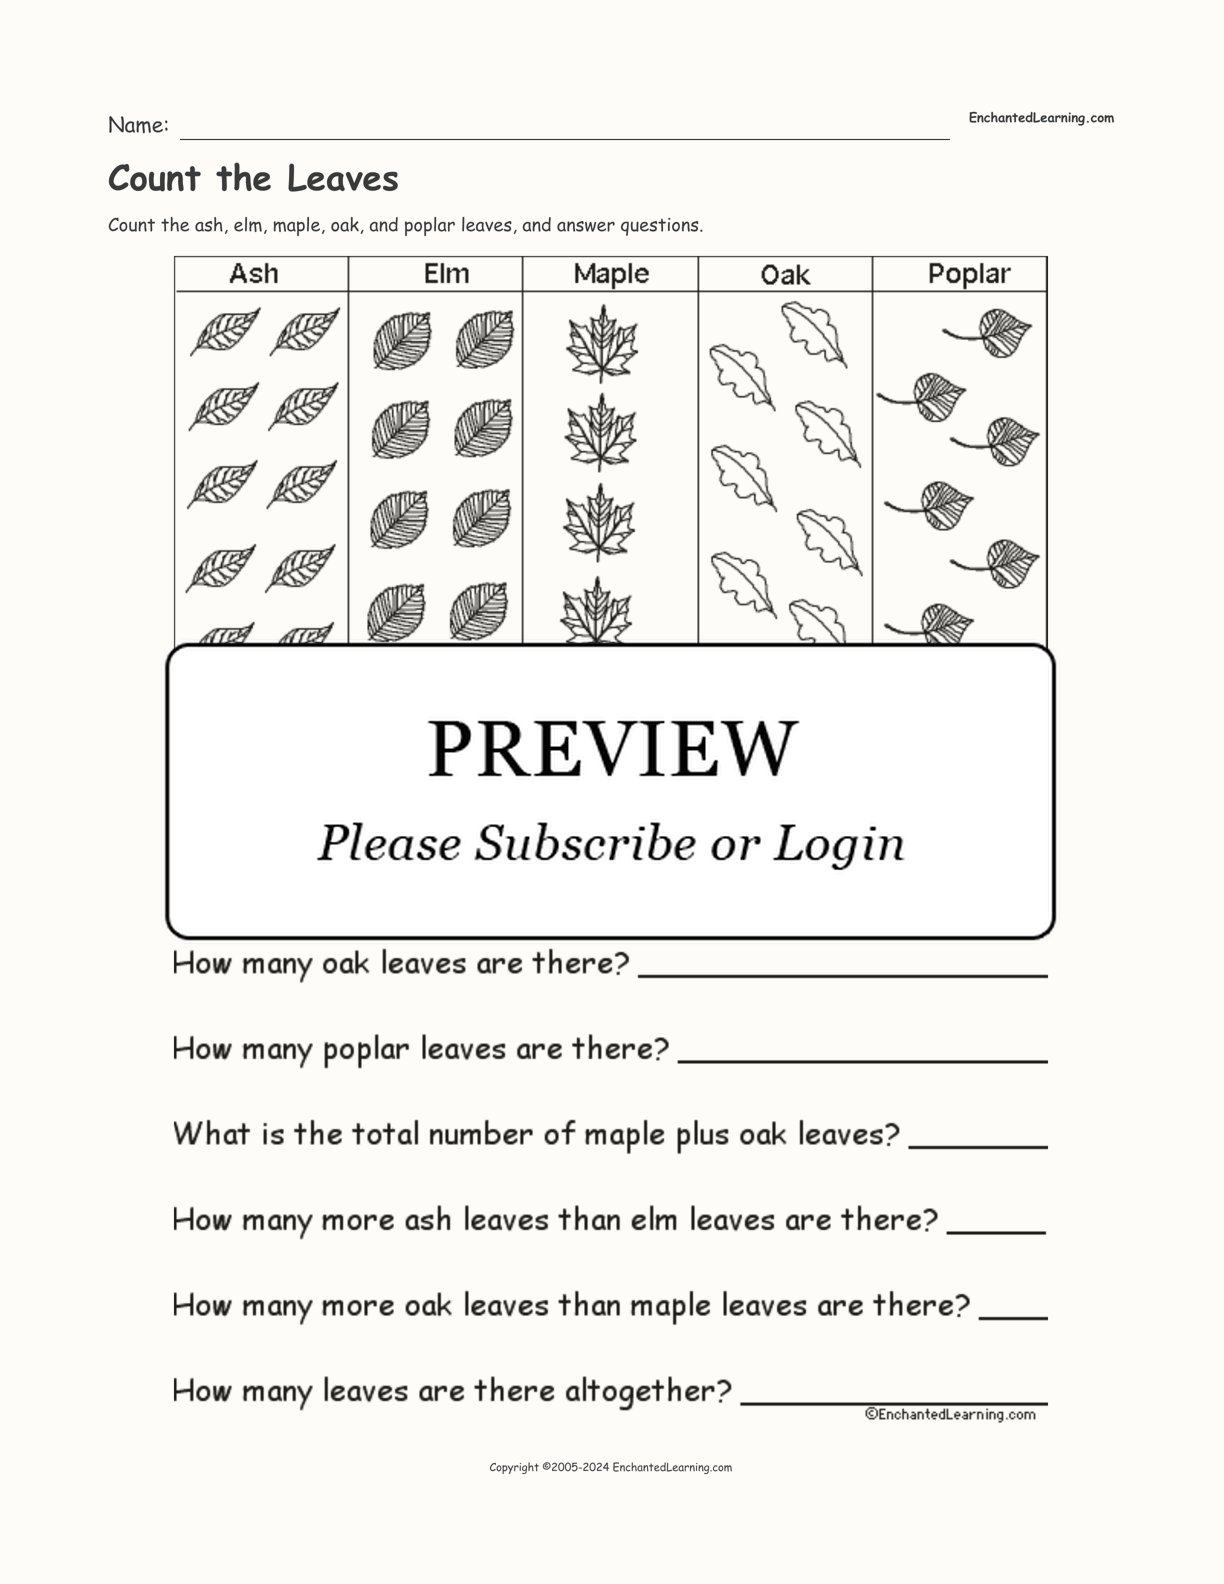 Count the Leaves interactive worksheet page 1